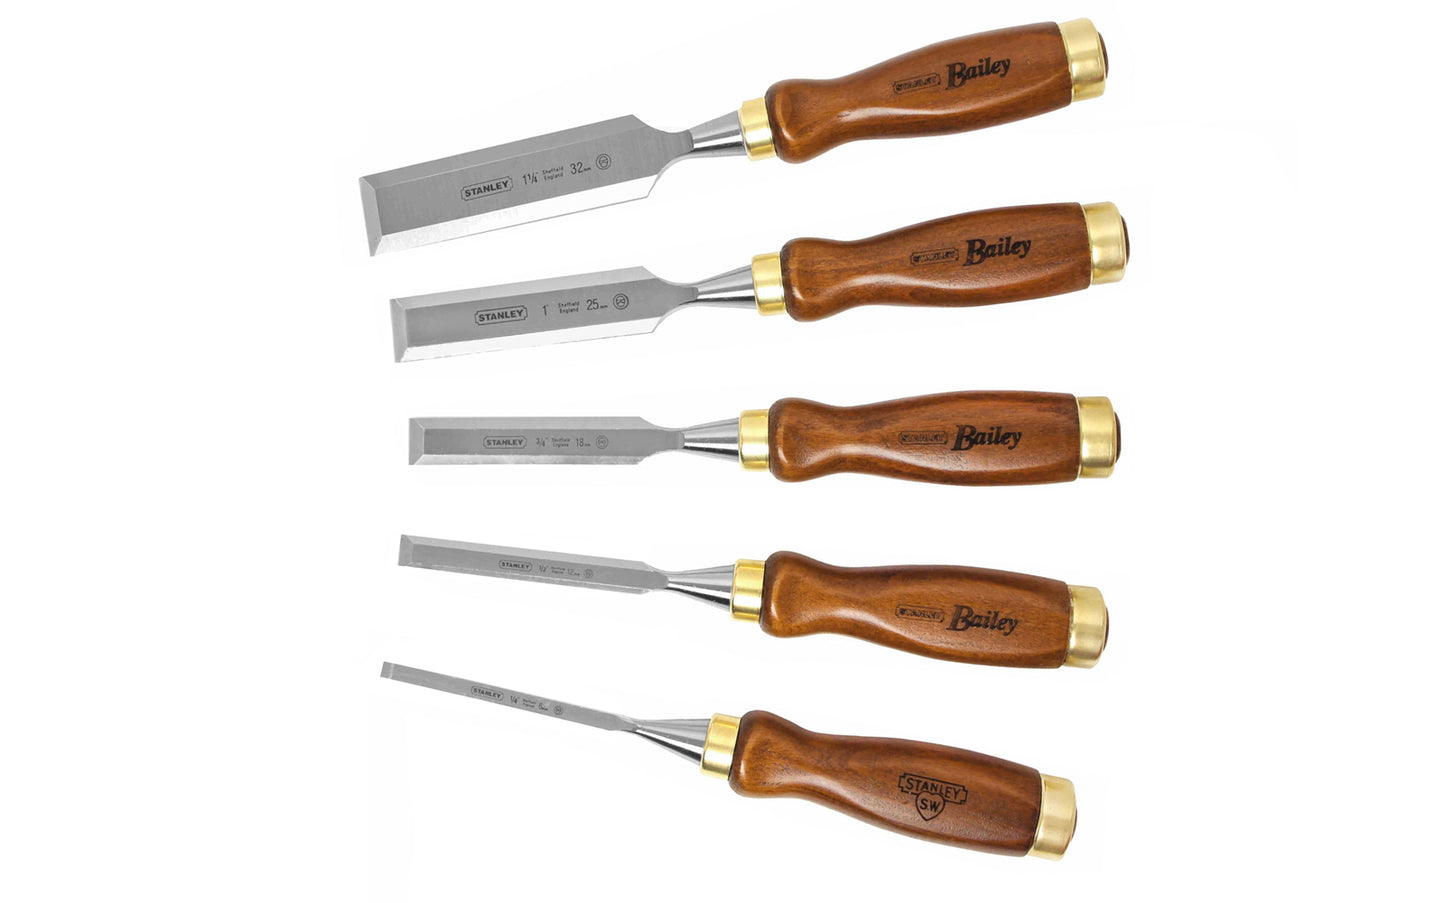 Stanley Bailey 5-Piece Wood Chisel Set with Leather Pouch ~ 1/4" - 1/2" - 3/4" - 1" - 1-1/4" - Model 16-401 ~ European Beech Wood Handles 